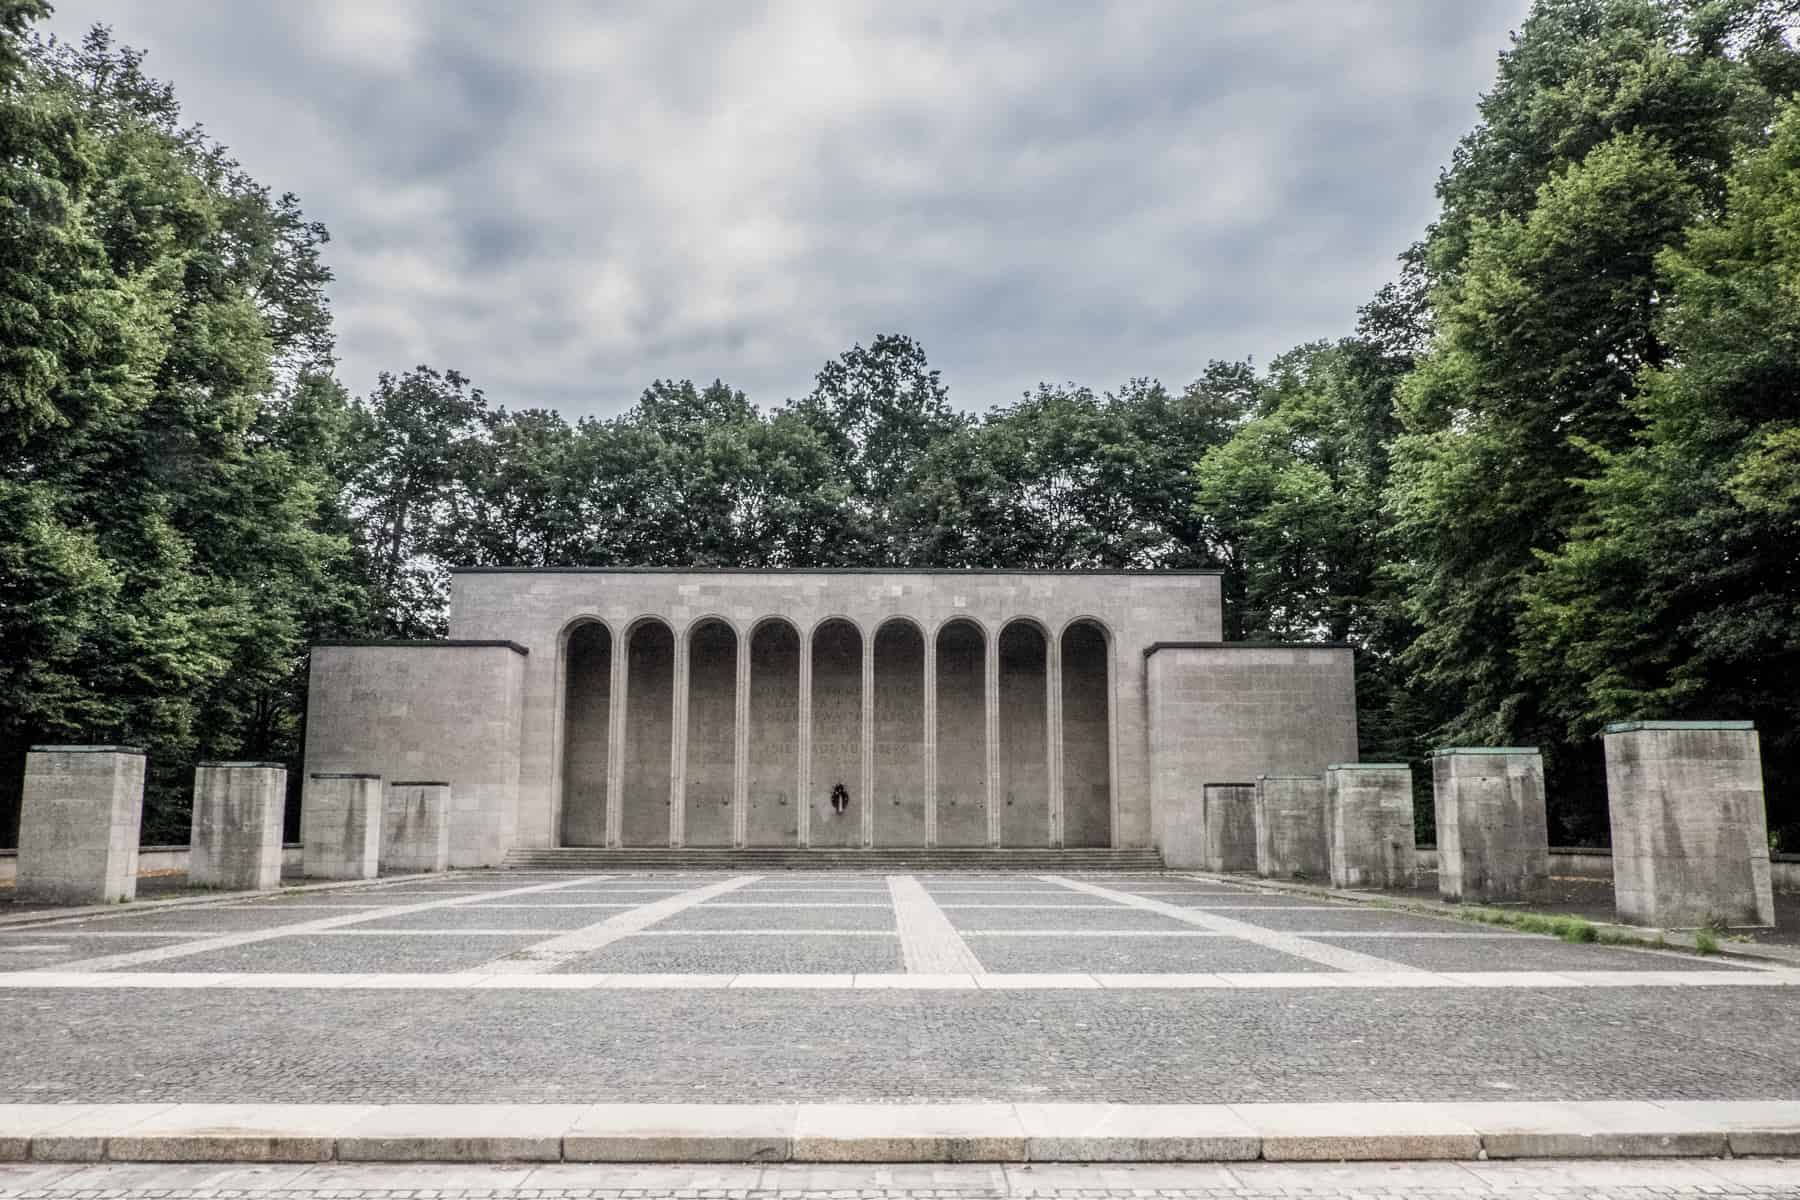 The nice column archways make up the facade of the rectangular Hall of Honour monument in nuremberg that was used as one of the staging grounds for the Nazi Party Rallies